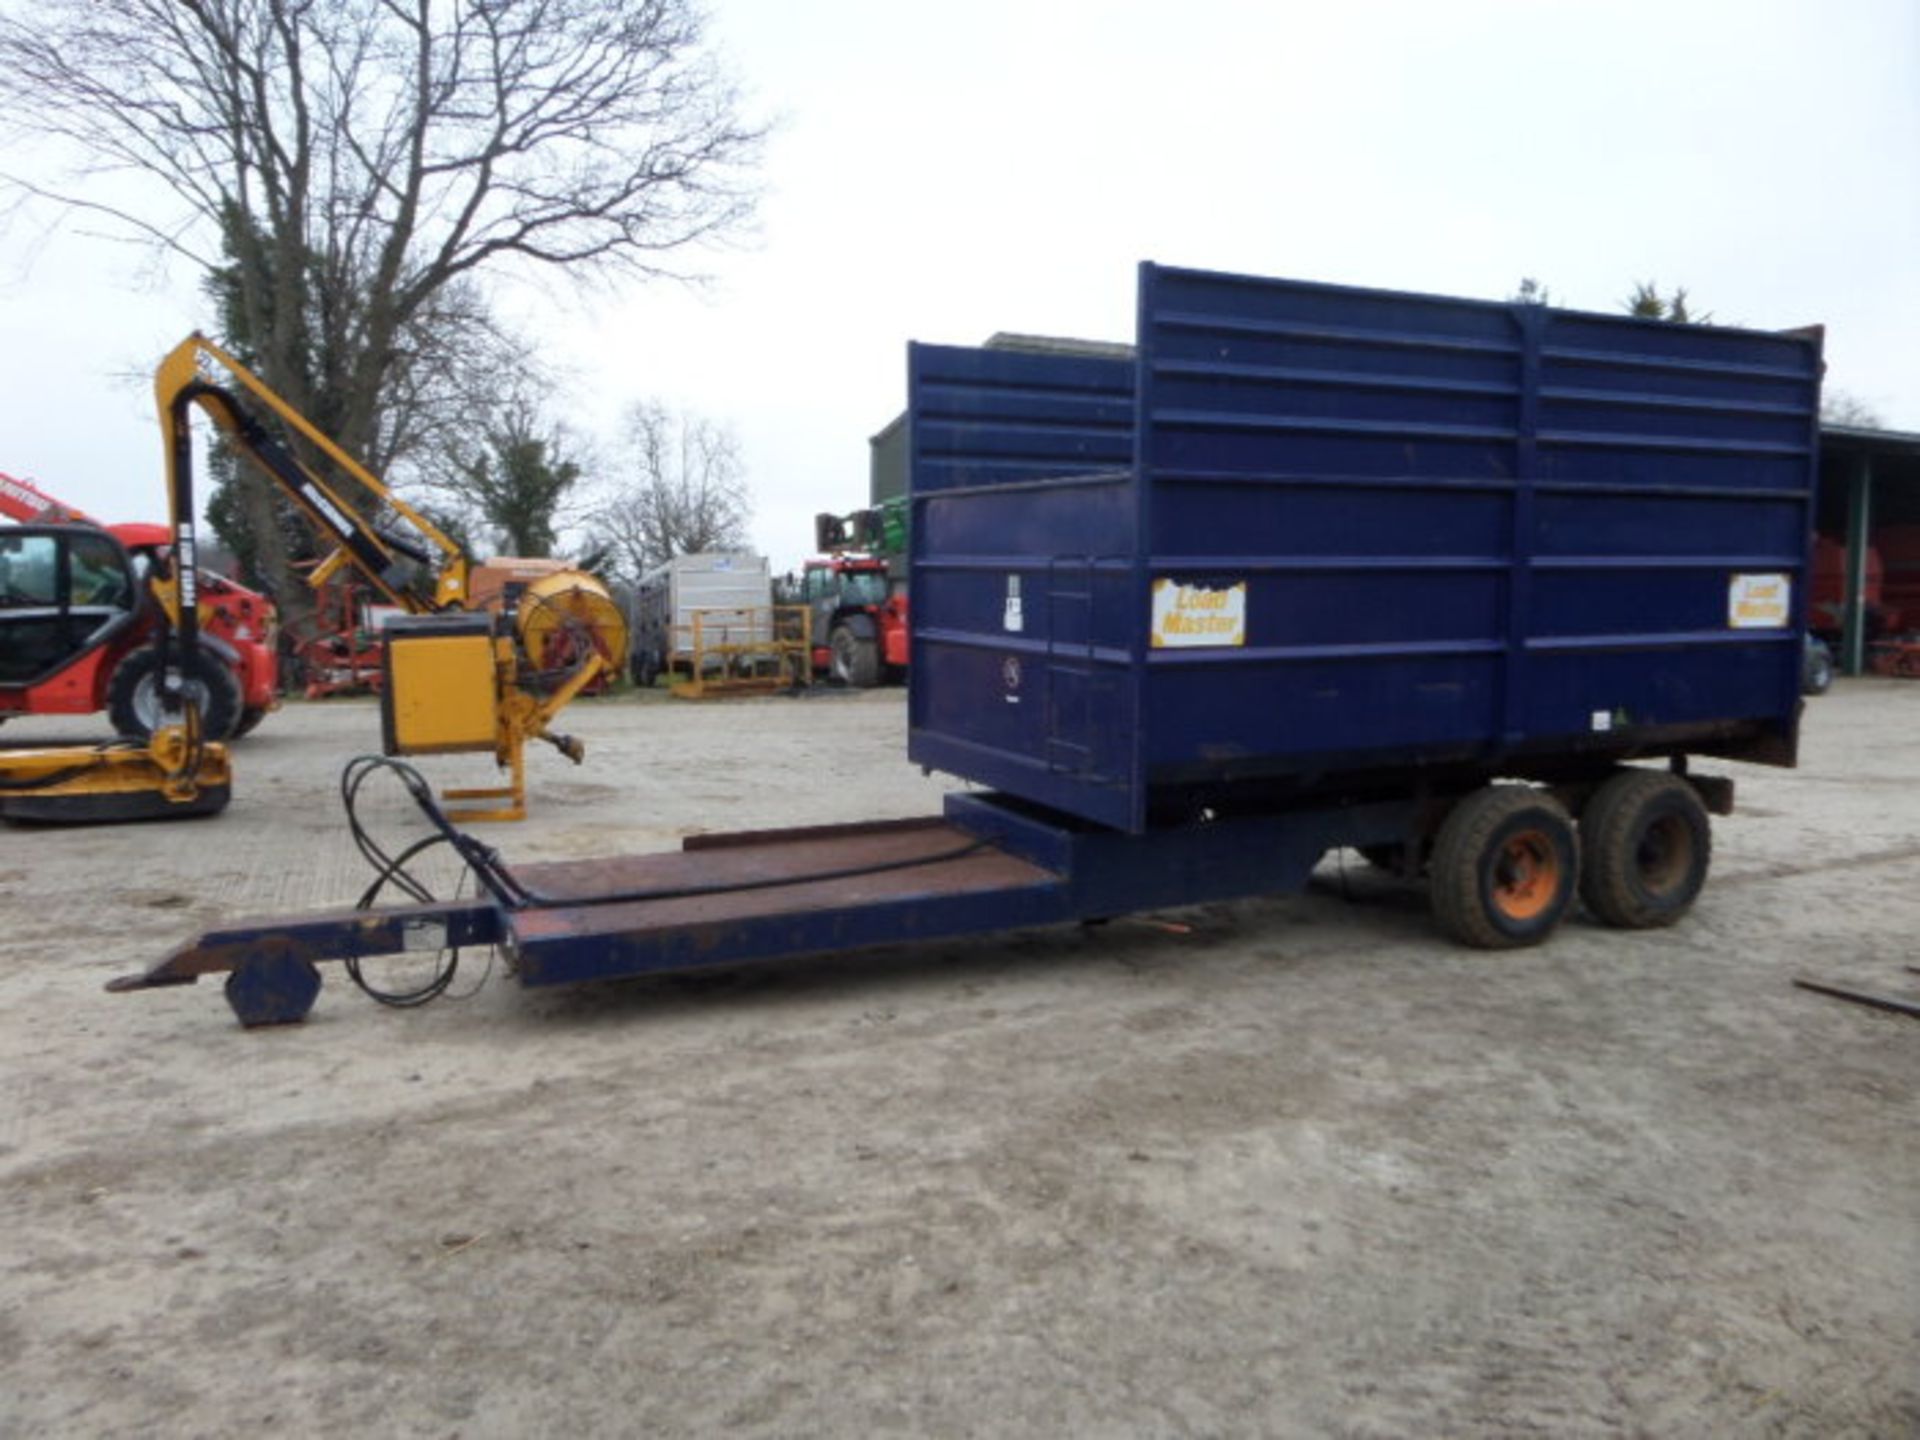 FOSTER 8 TONNE LOAD MASTER TIPPING TRAILER - Image 2 of 6